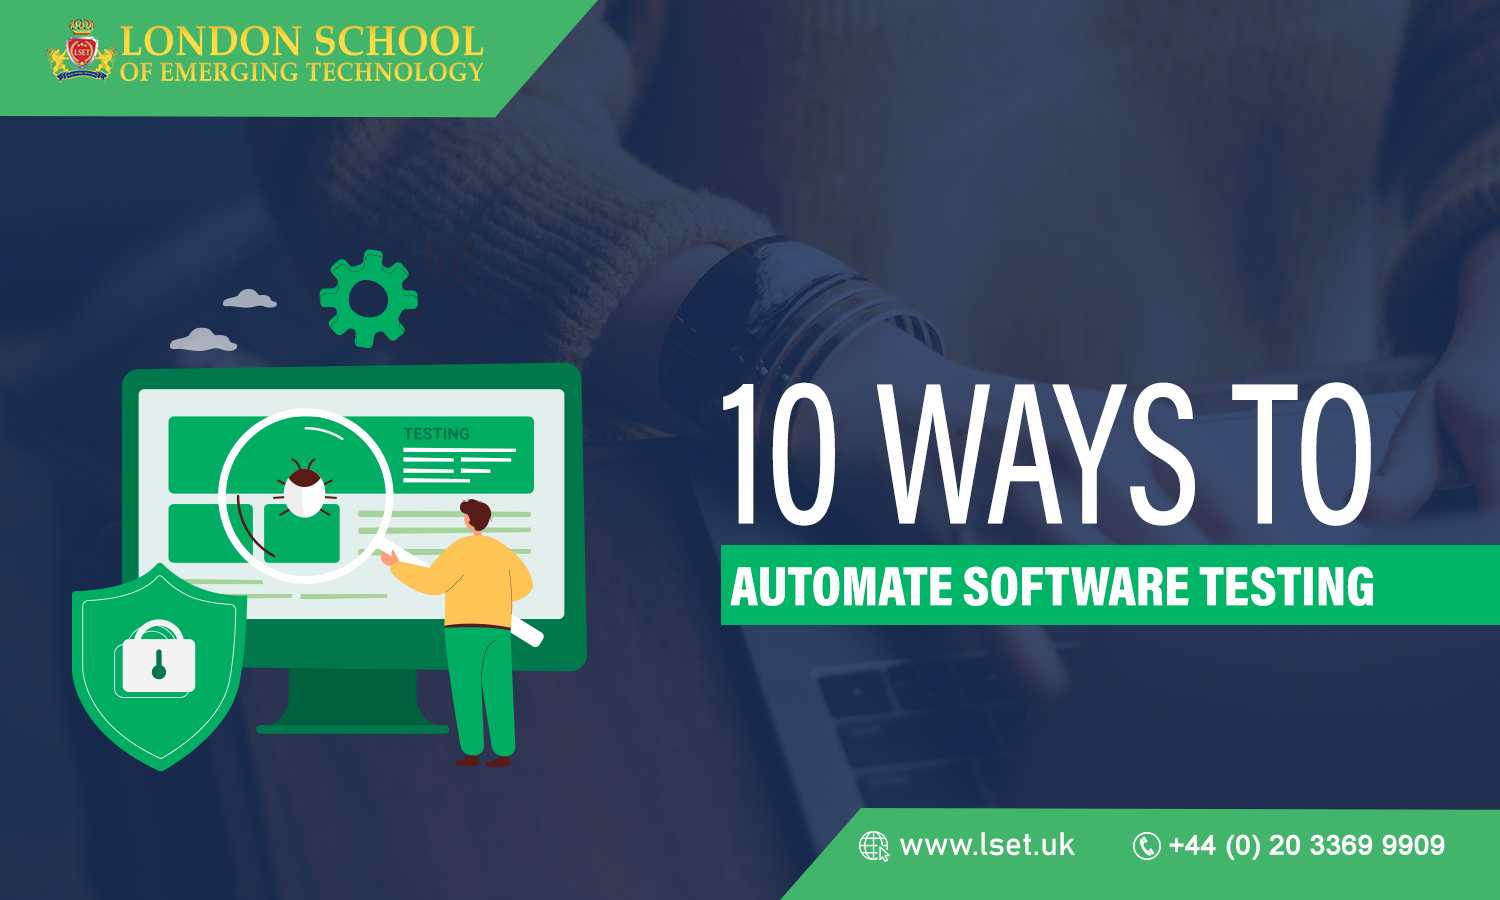 10 Ways to Automate Software Testing